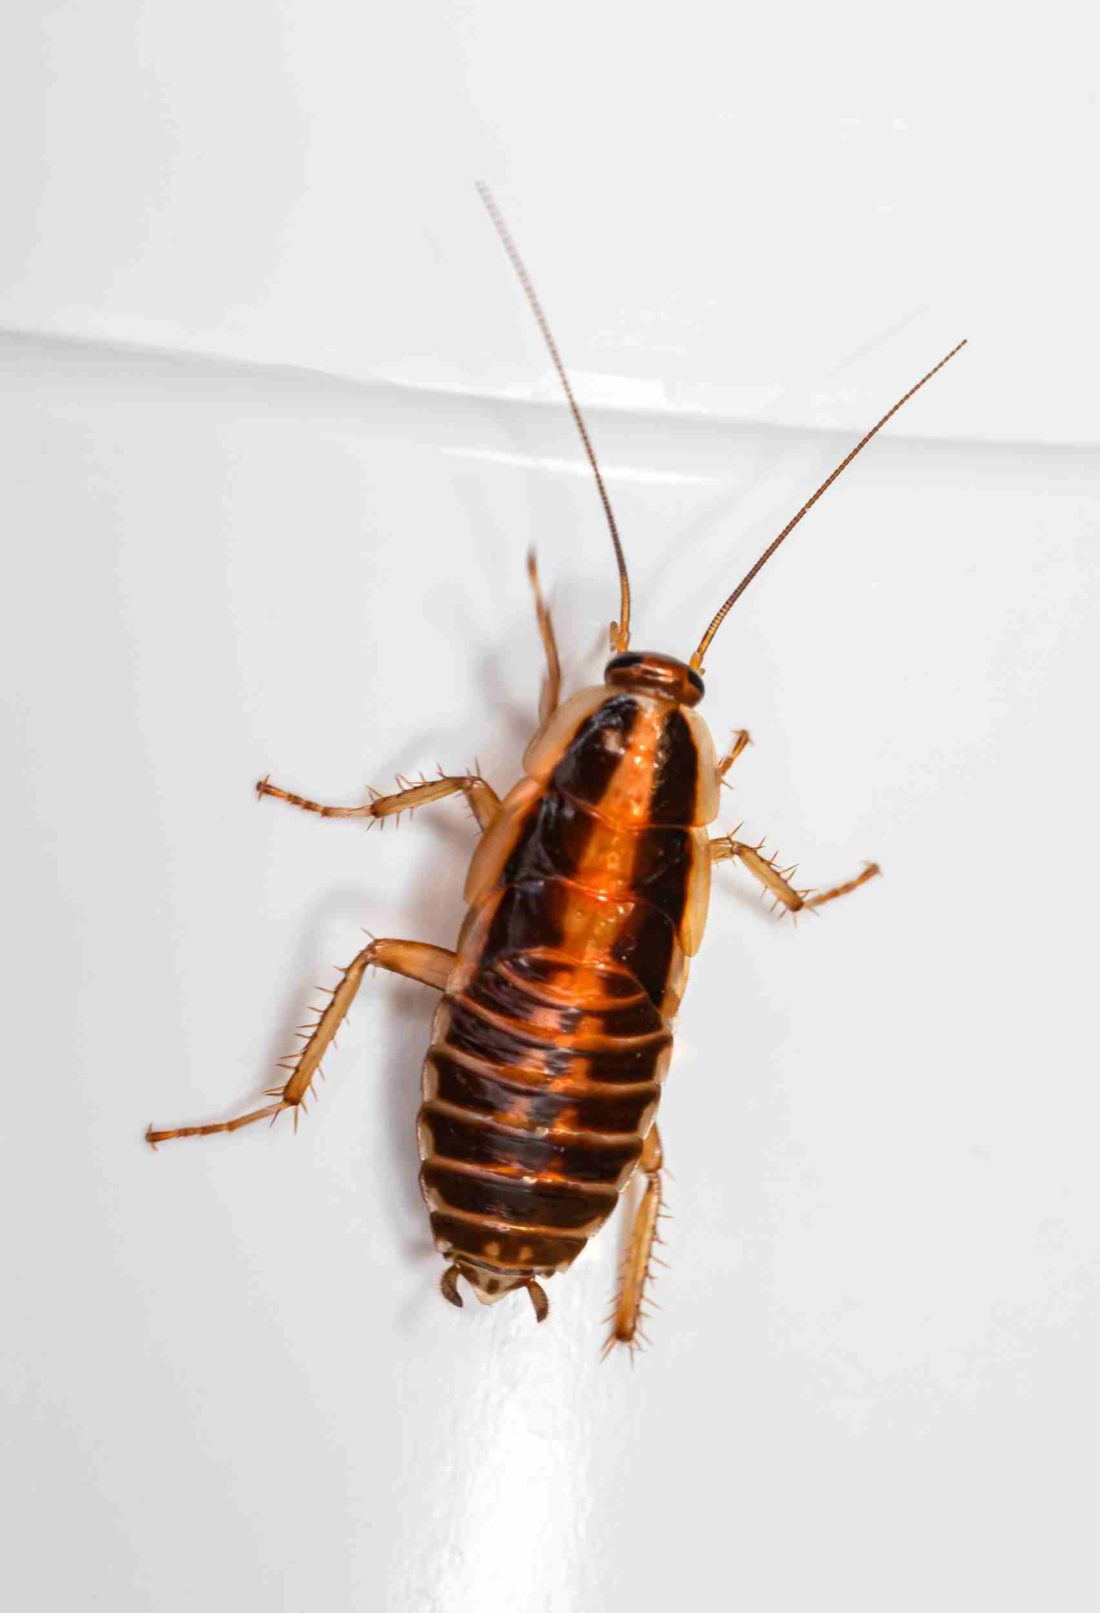 6 Ways to Eliminate Unwanted Pests in Your Home